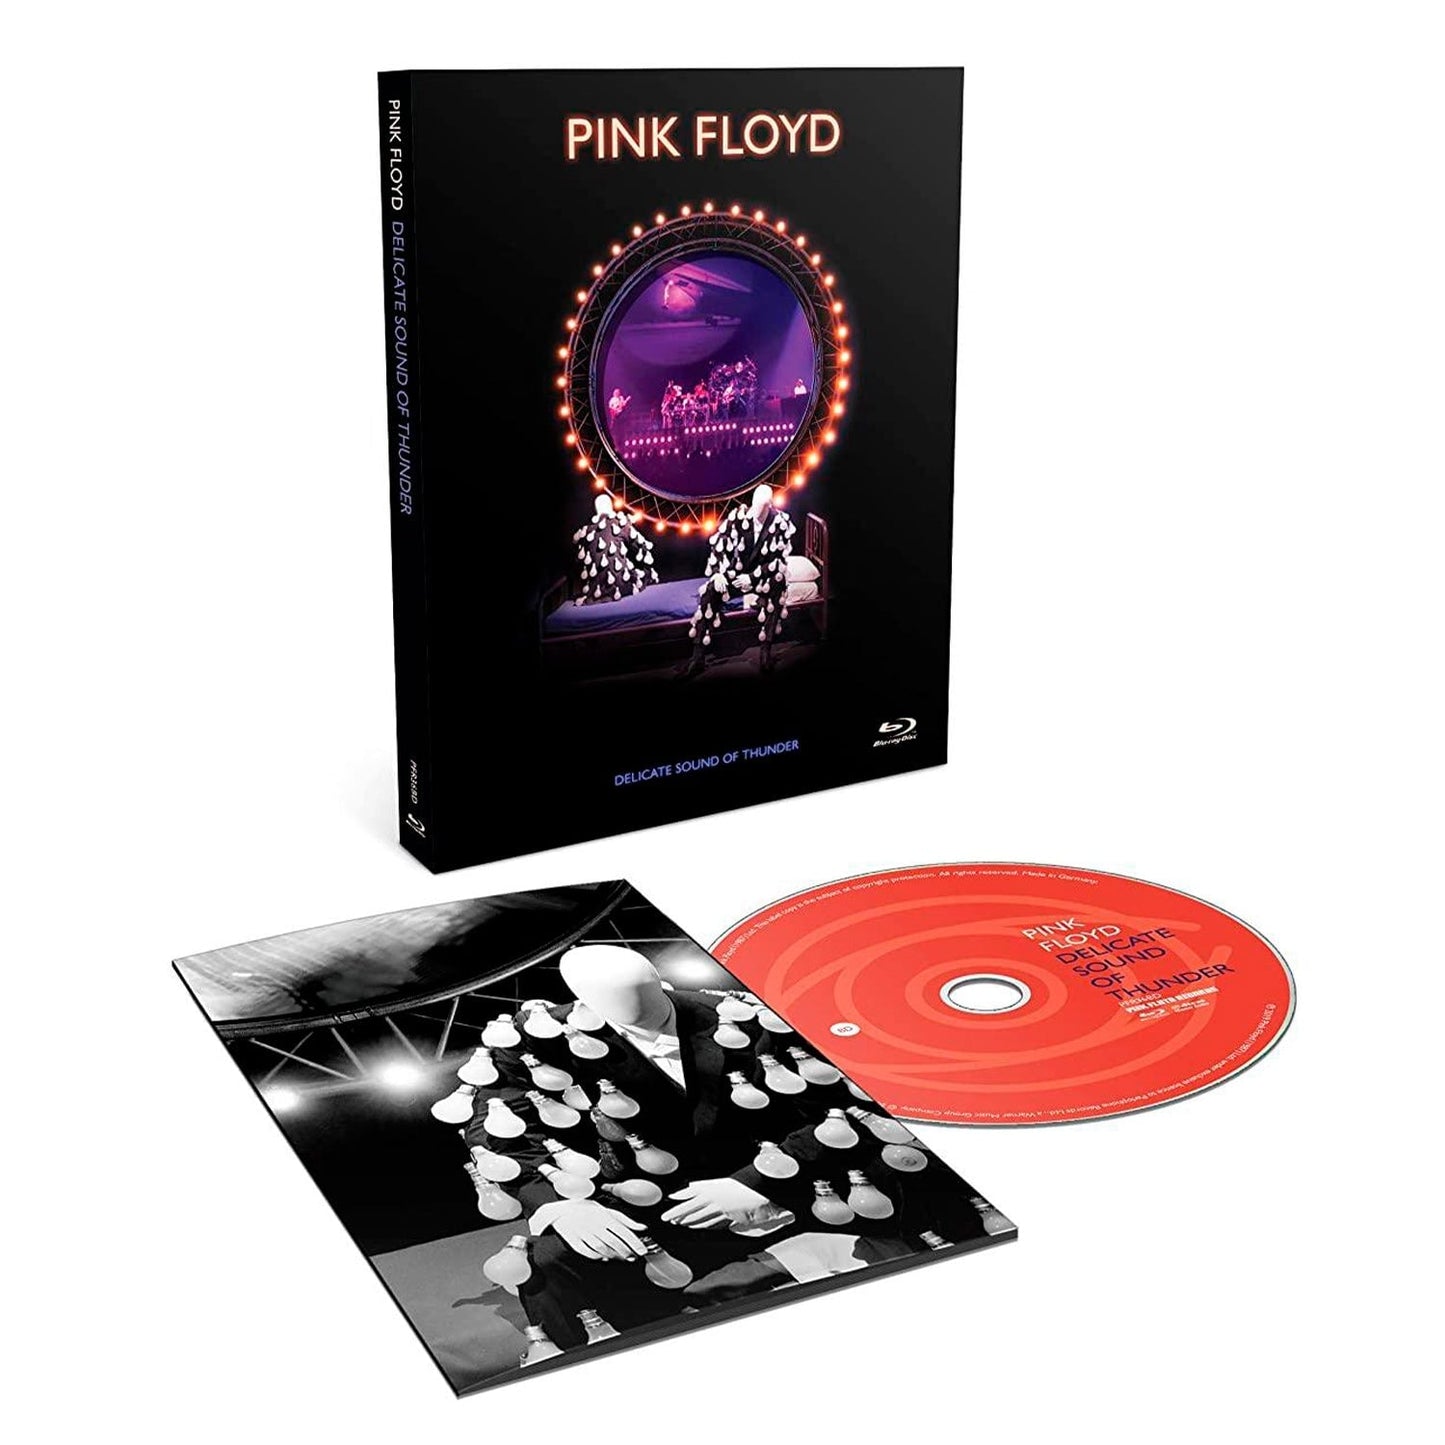 Pink Floyd: Delicate Sound of Thunder [Restored, Re-edited, Remixed] (Blu-ray)